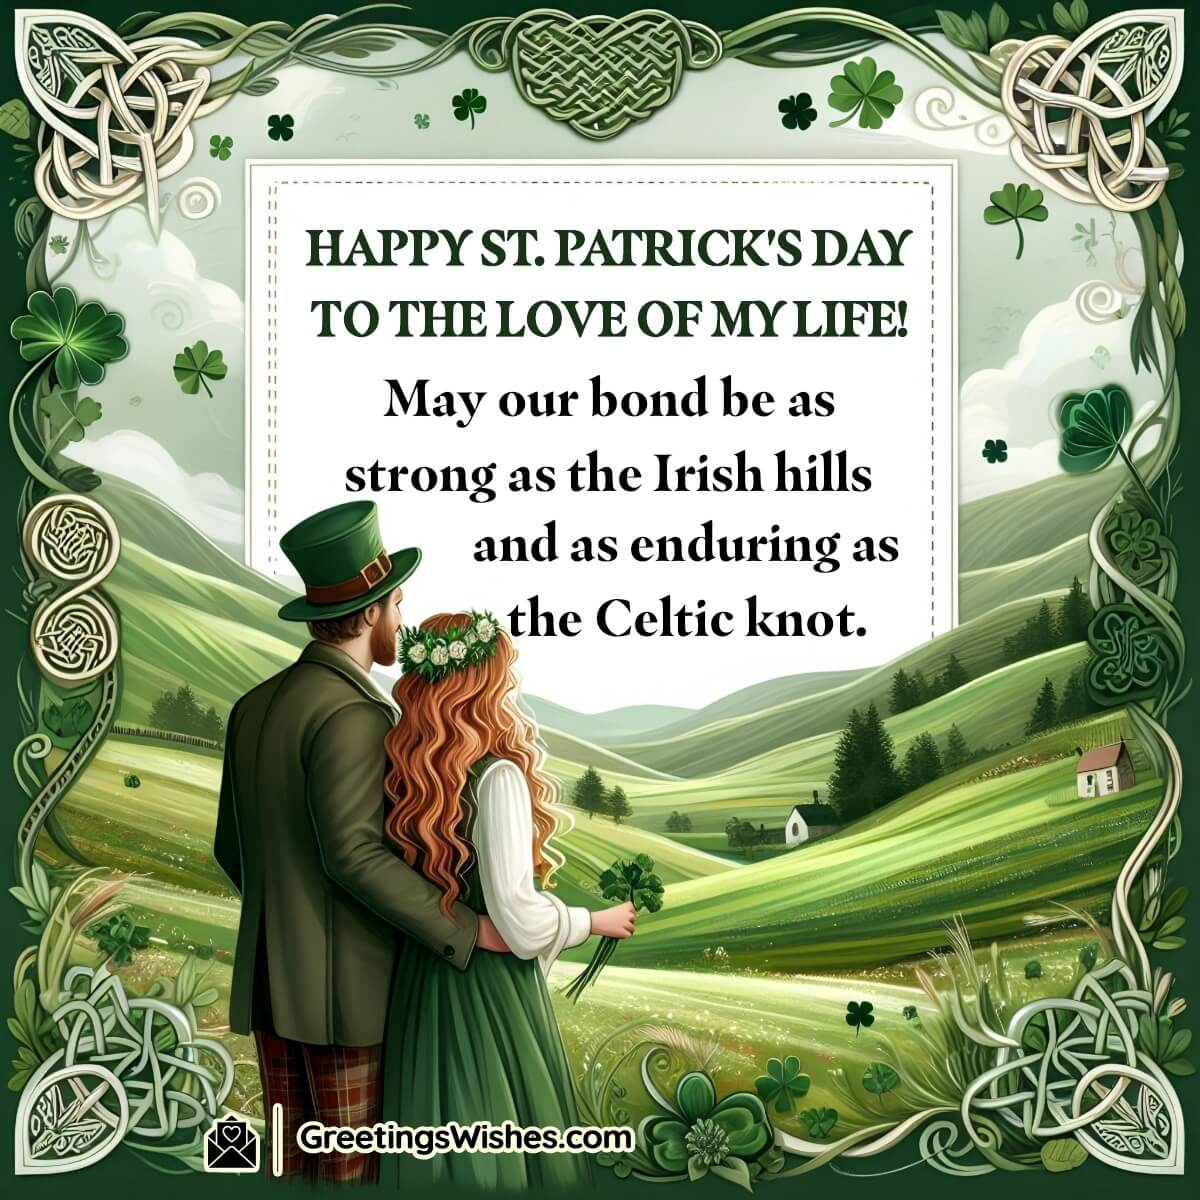 St. Patrick’s Day Wishes For Love